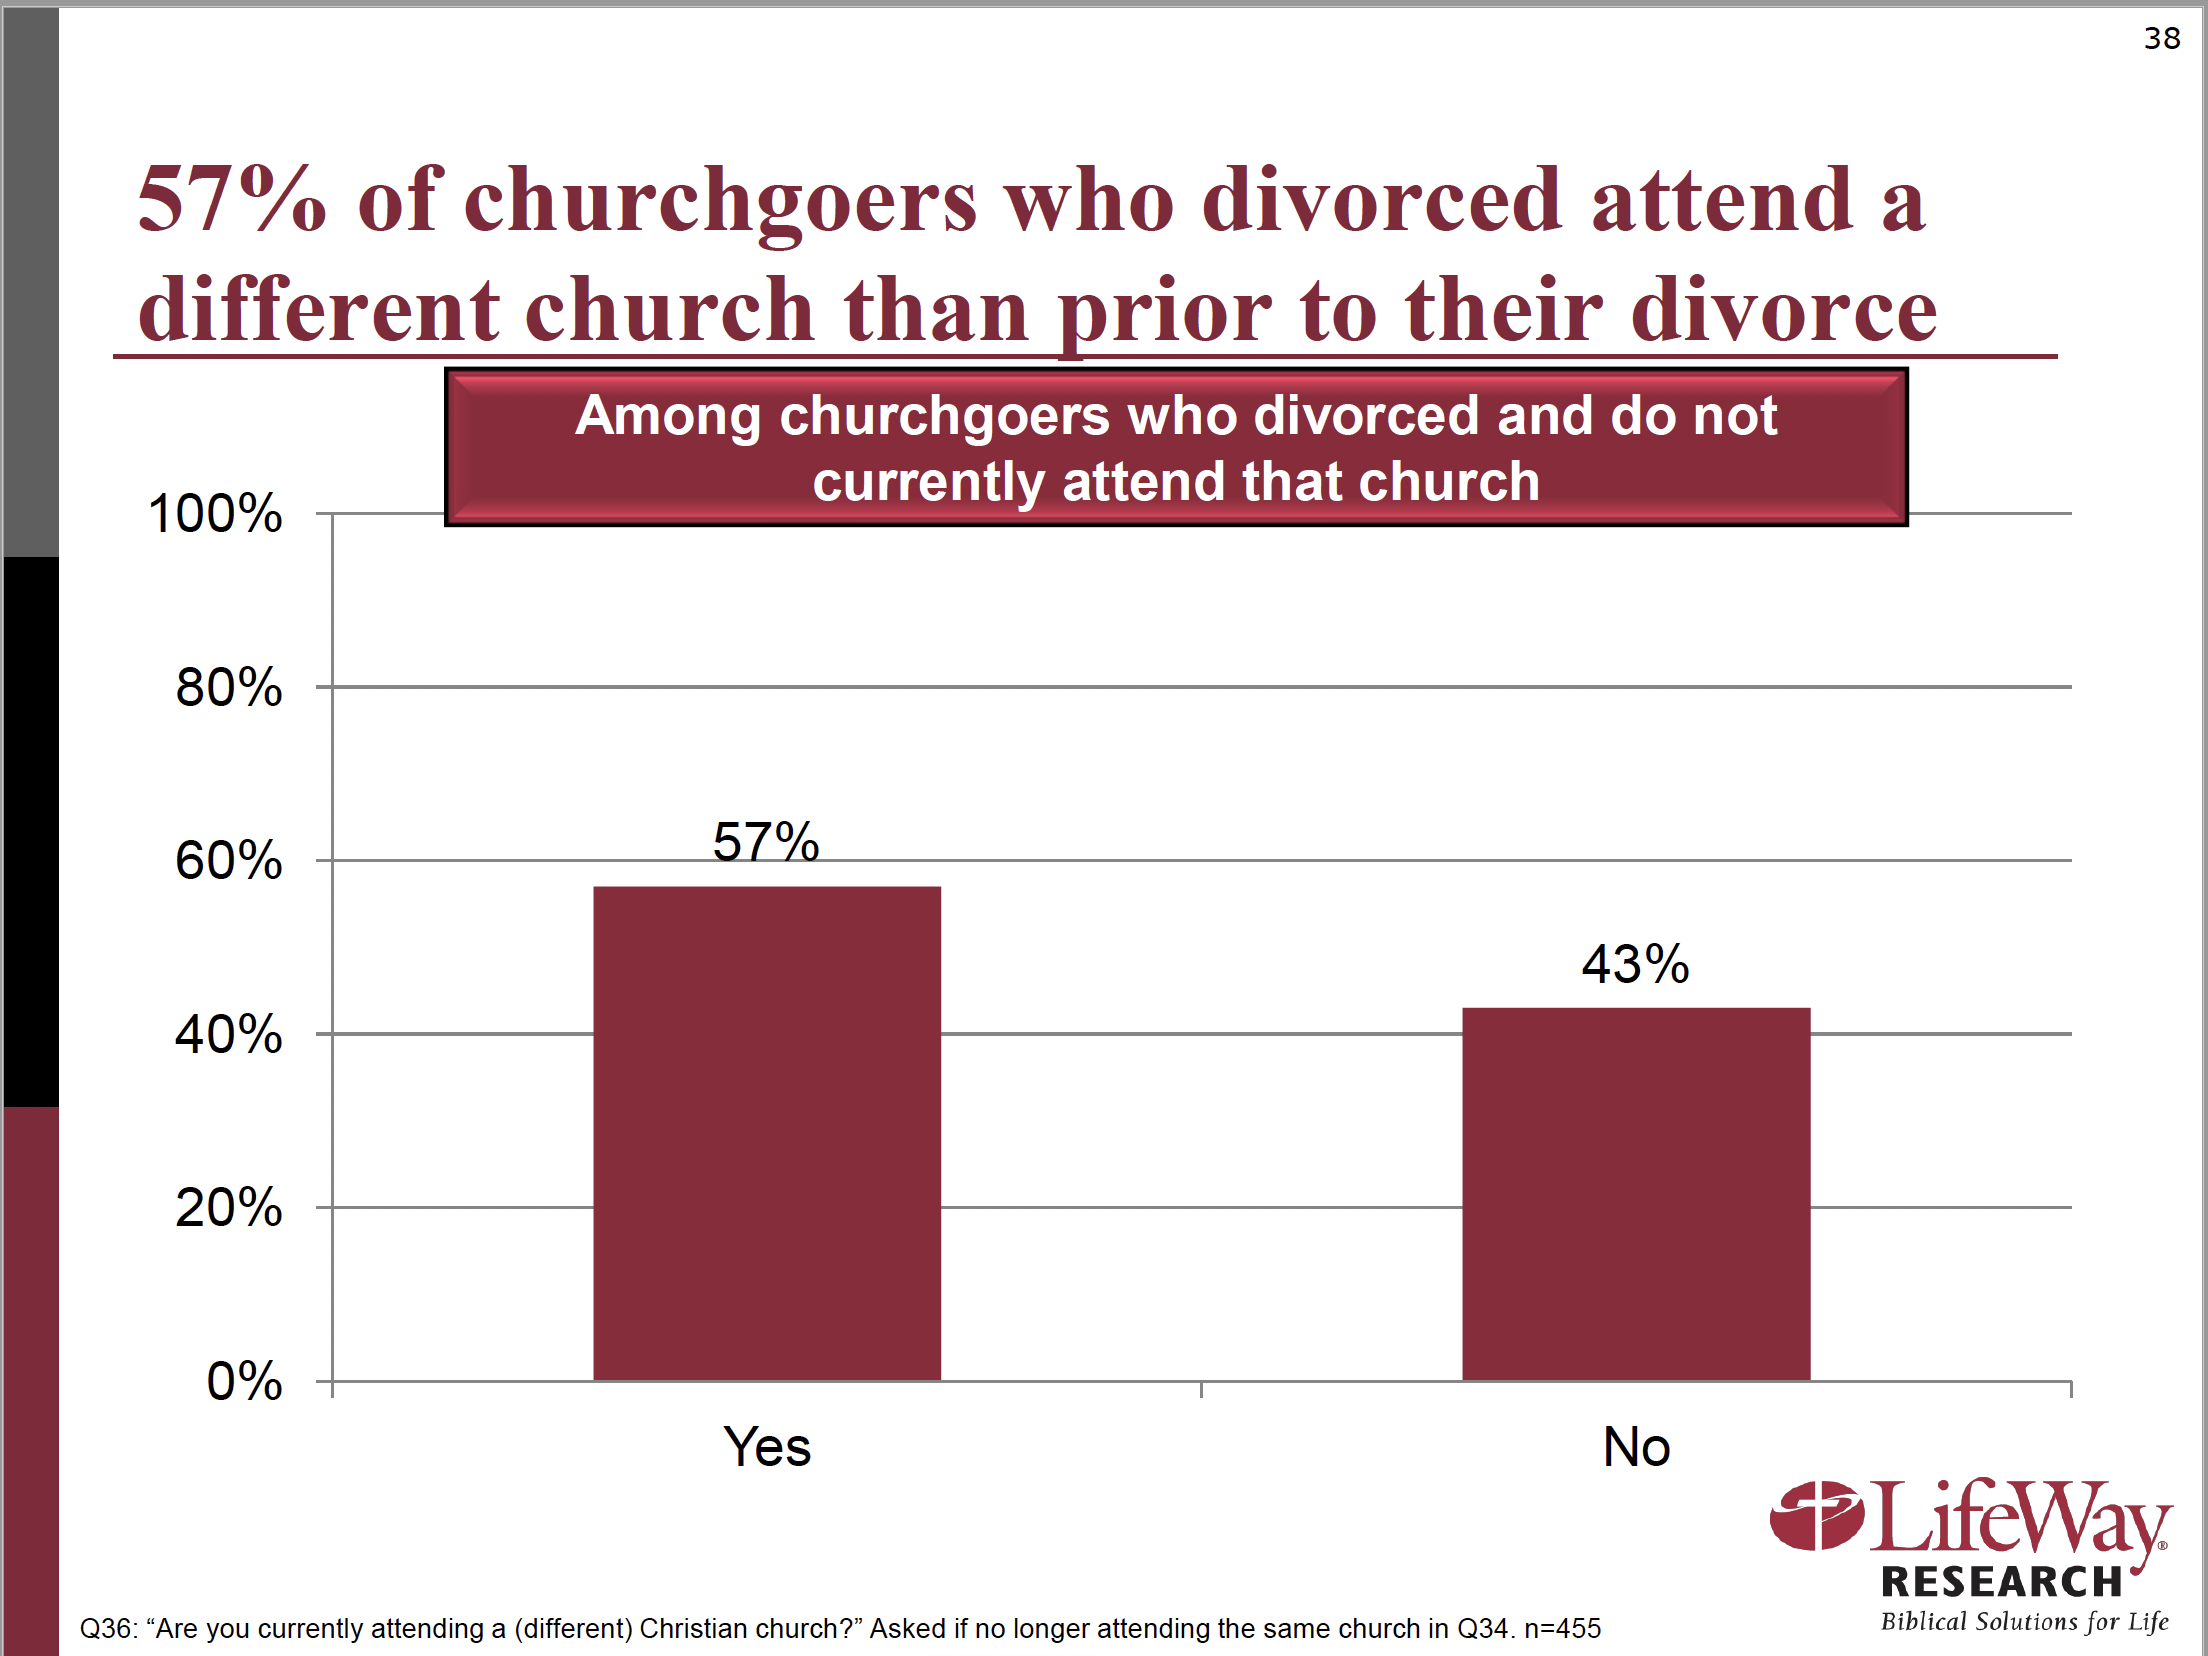 This graph shows that nearly 6 in 10 churchgoing Christians switch churches when they divorce. 